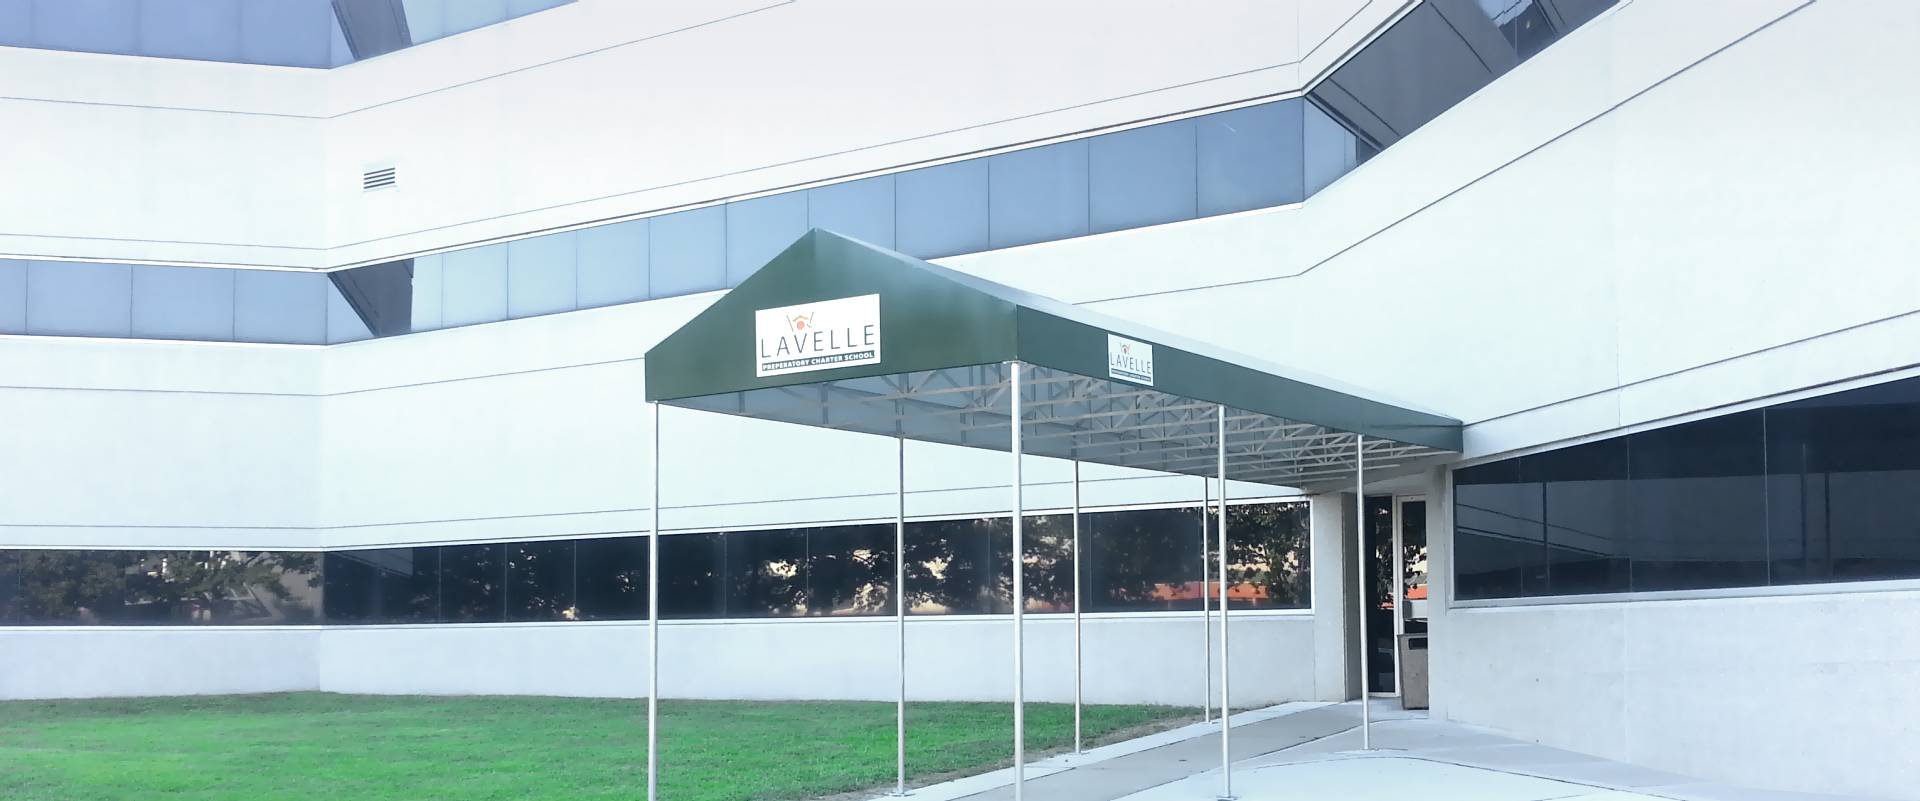 Leading Provider of Custom Awnings in New Jersey and NYC